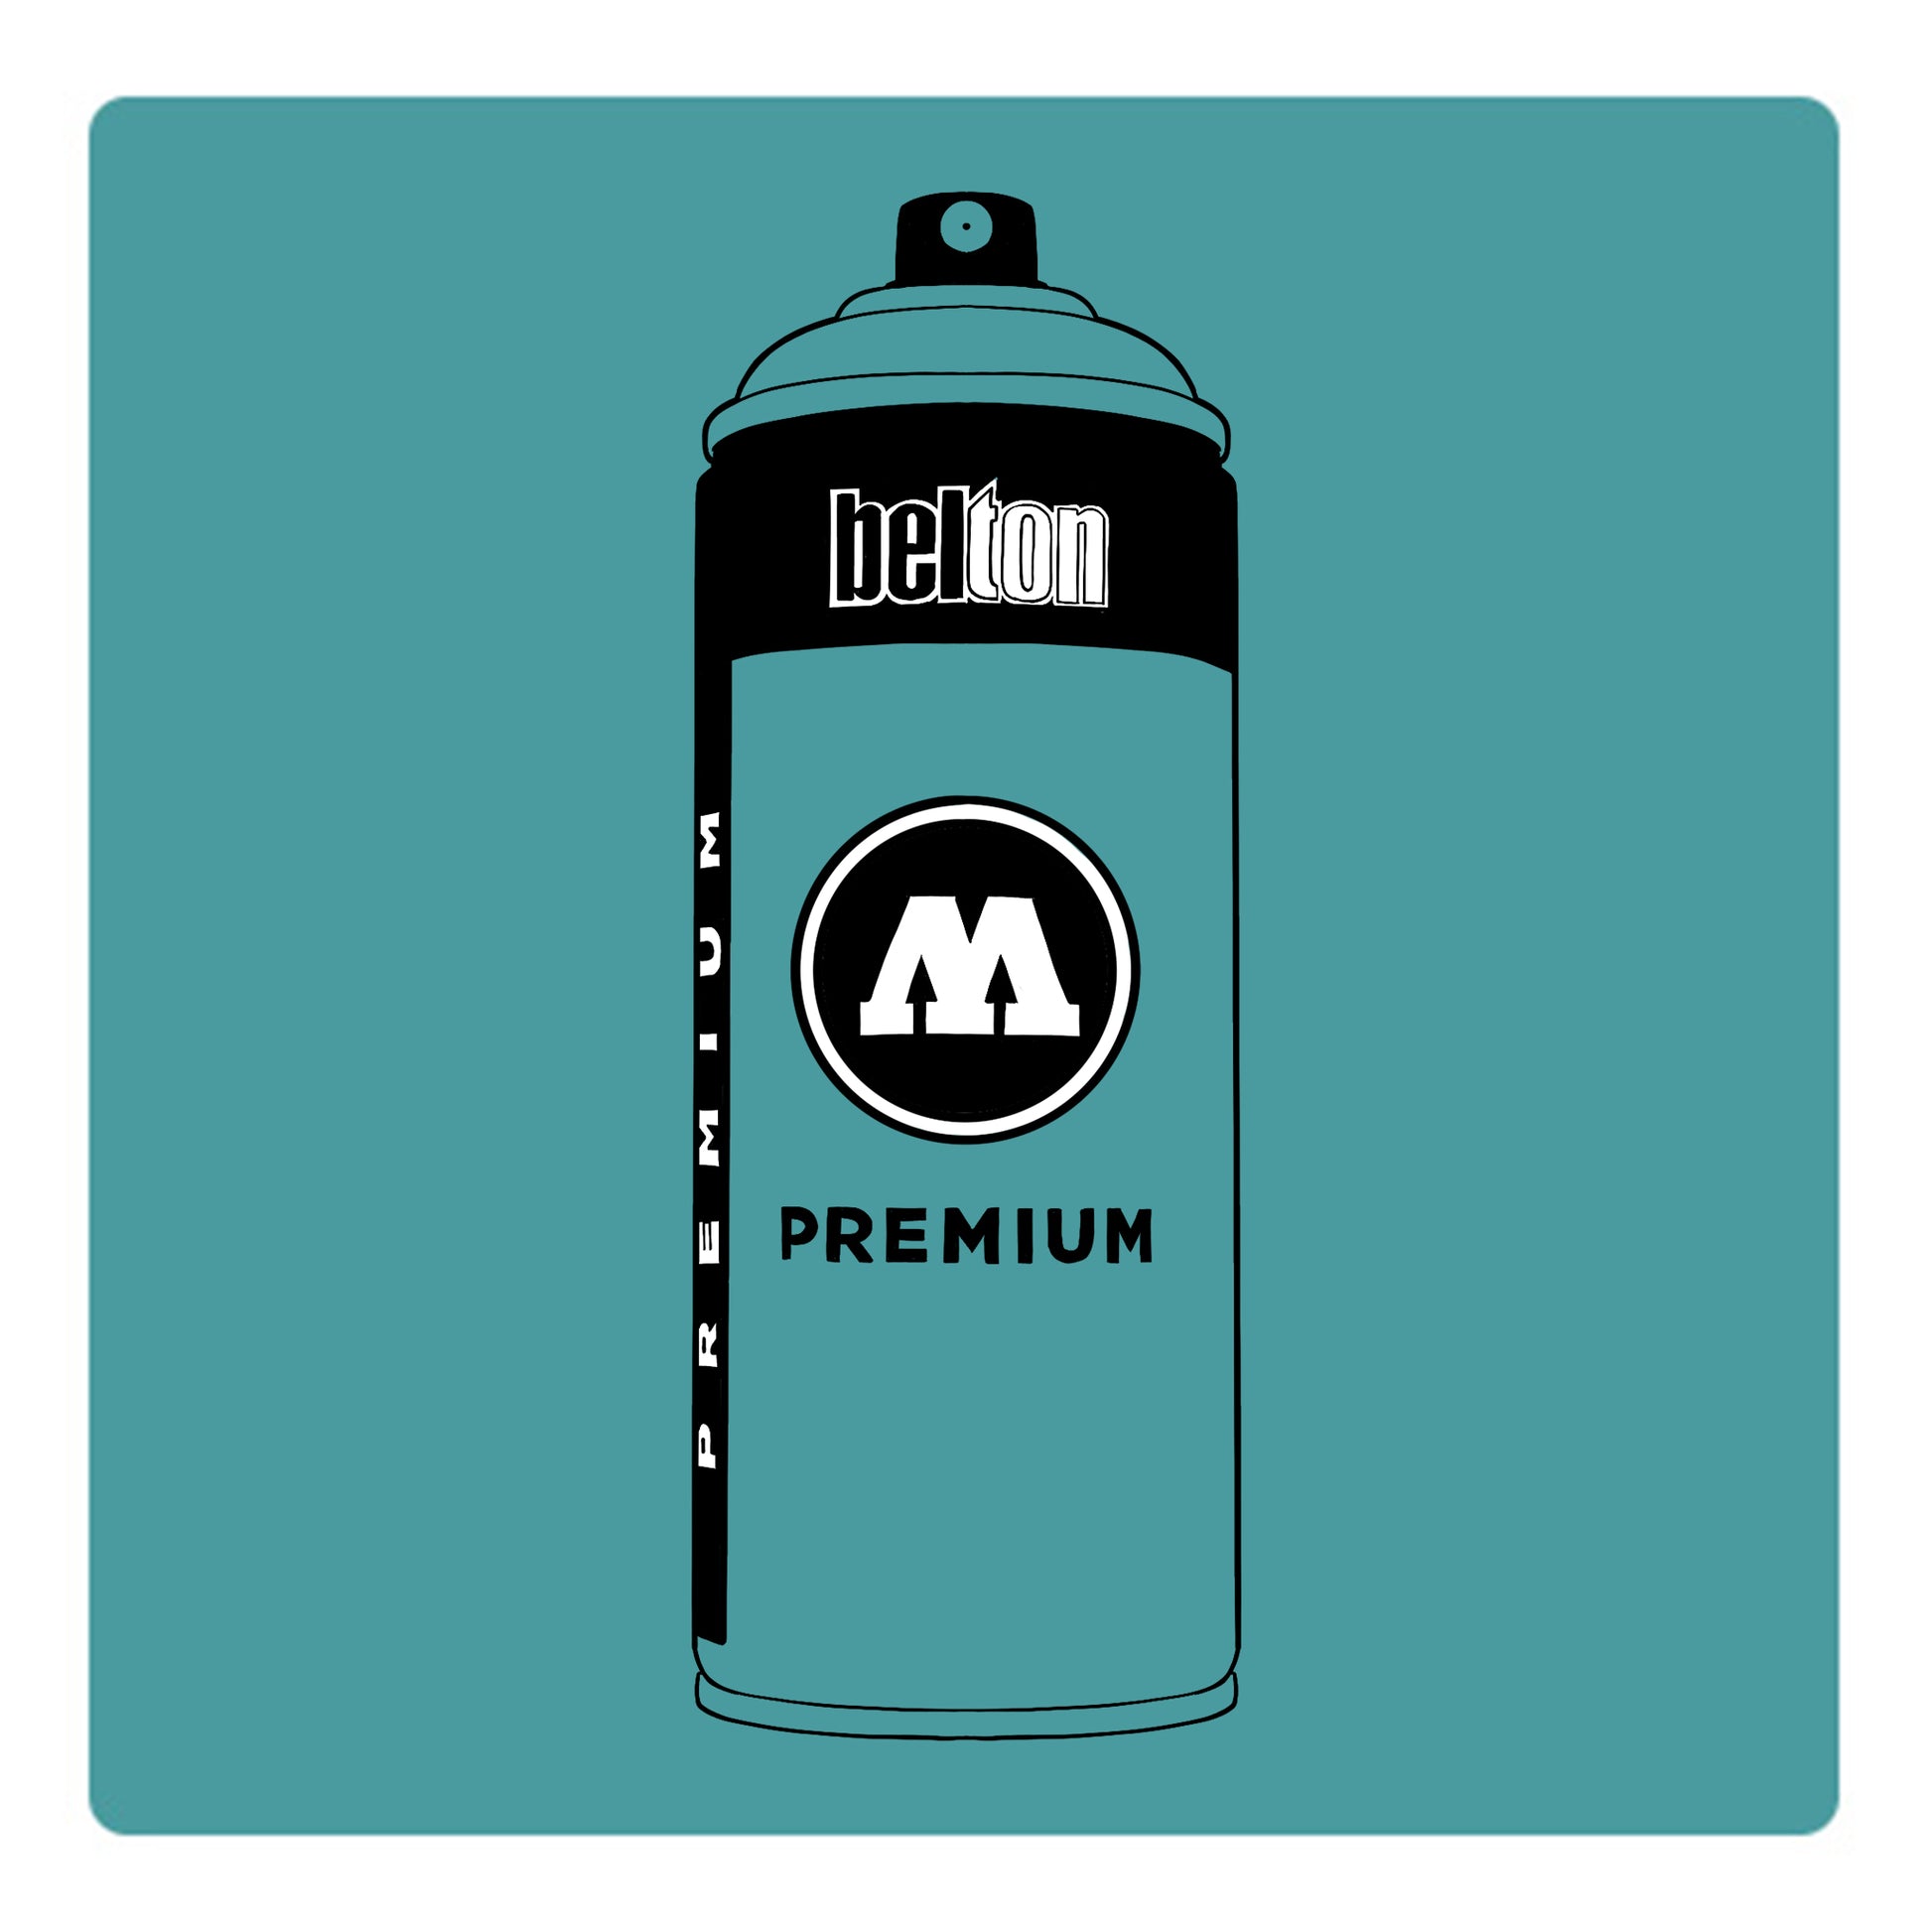 A black outline drawing of a turquoise spray paint can with the words "belton","premium" and the letter"M" written on the face in black and white font. The background is a color swatch of the same Turquoise with a white border.